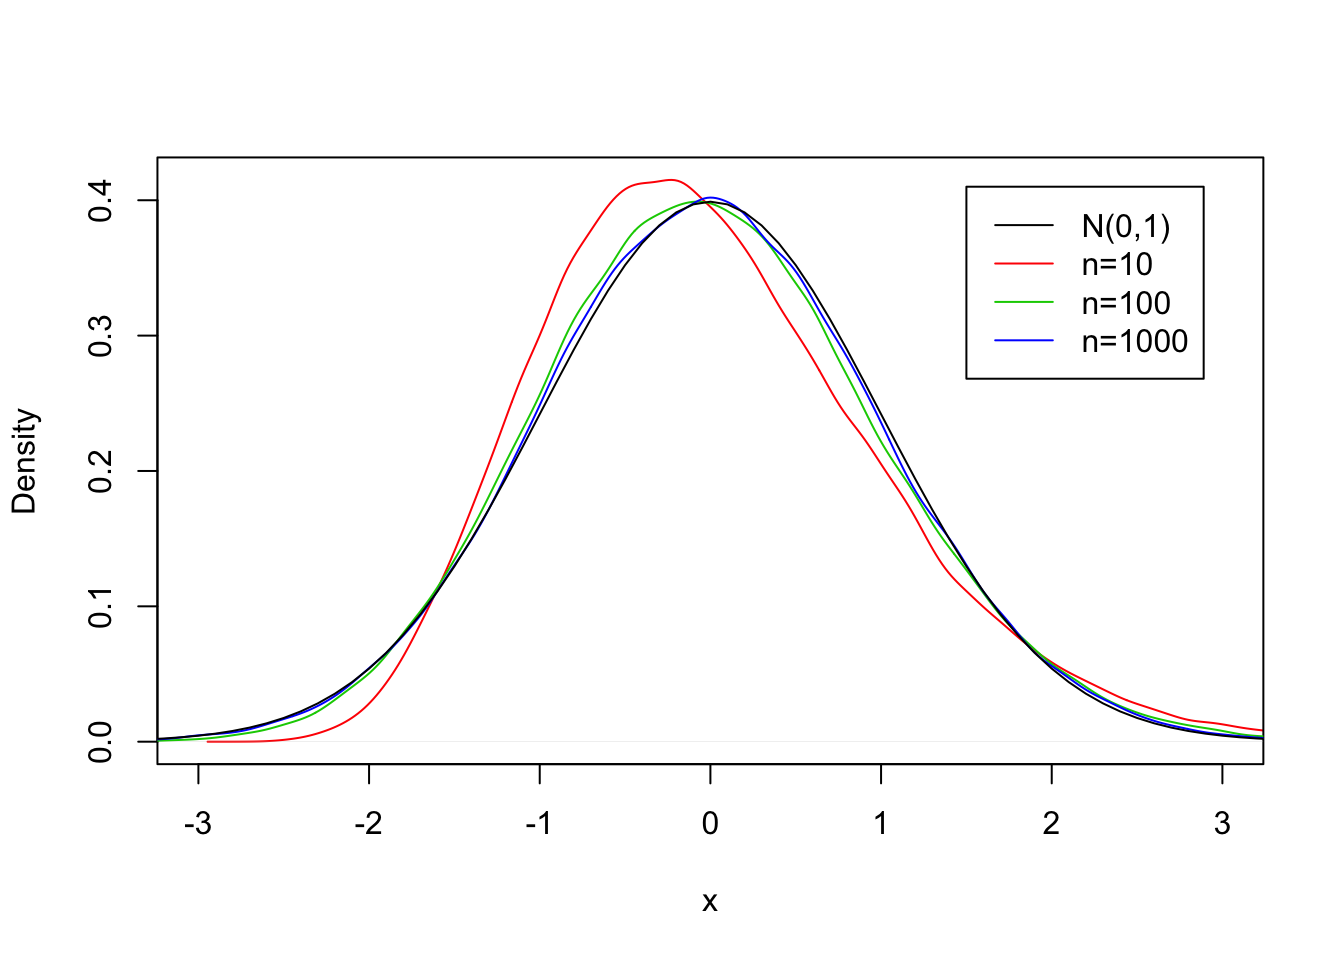 The CLT for the Exponential(0.5) Distribution